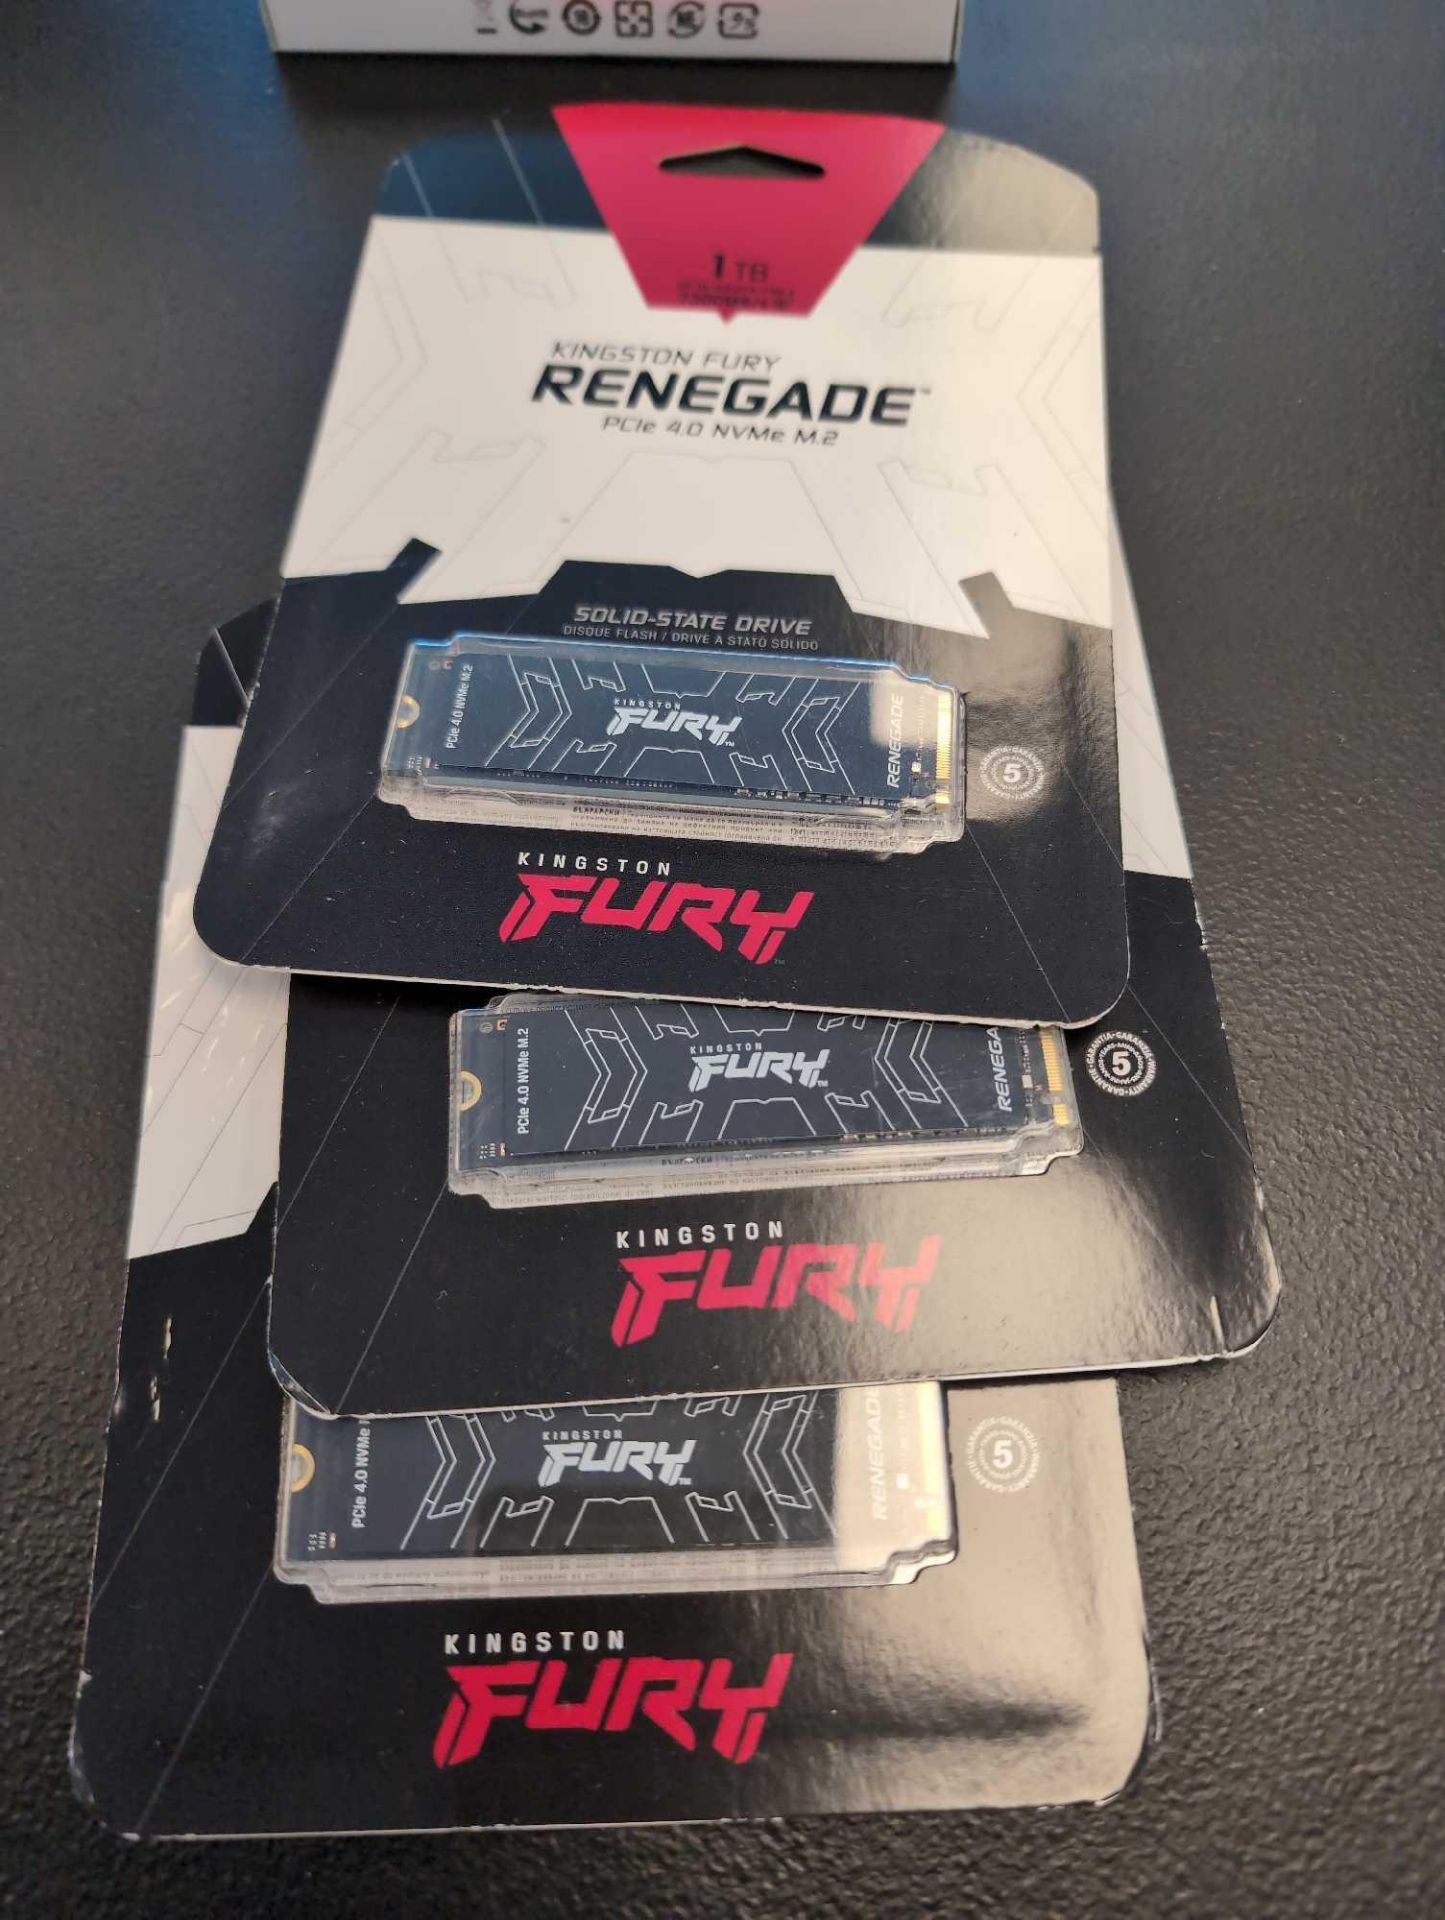 2 -Adata 2 TB PS5 Expansion SSD, 3 Kingston Fury Renegade PCIe, 4.0 NVME M.2 Cards - Image 4 of 4